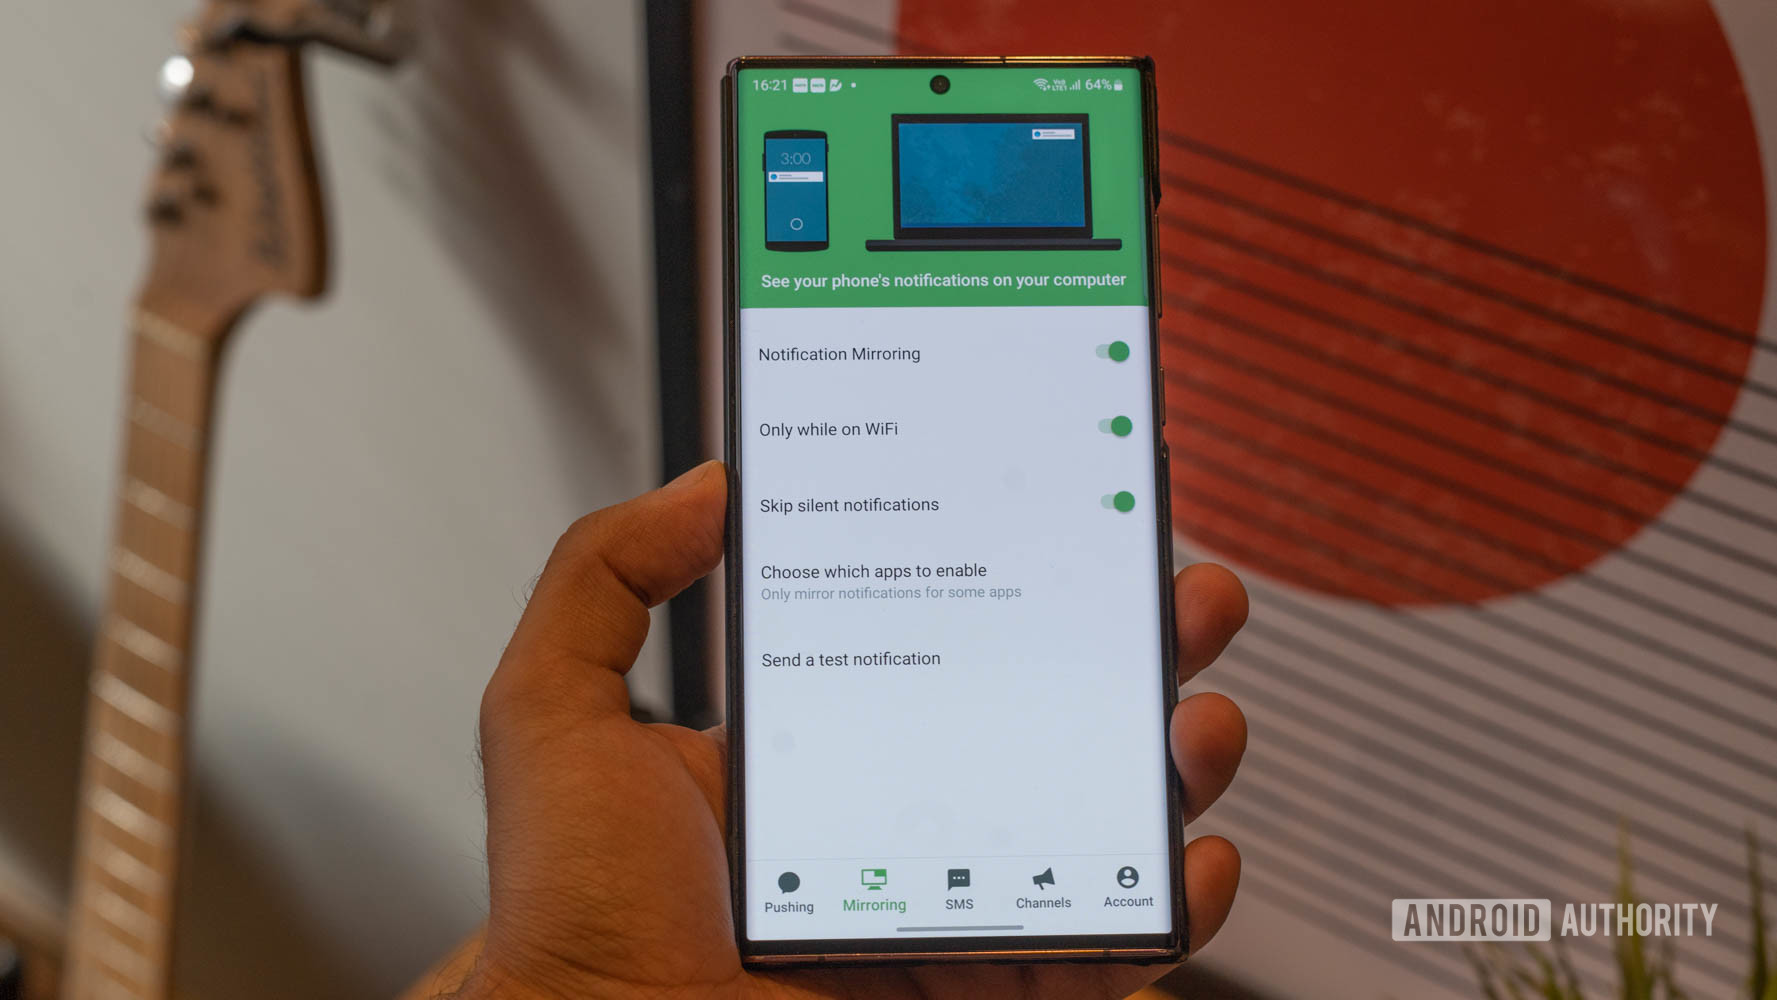 Pushbullet running on phone in hand